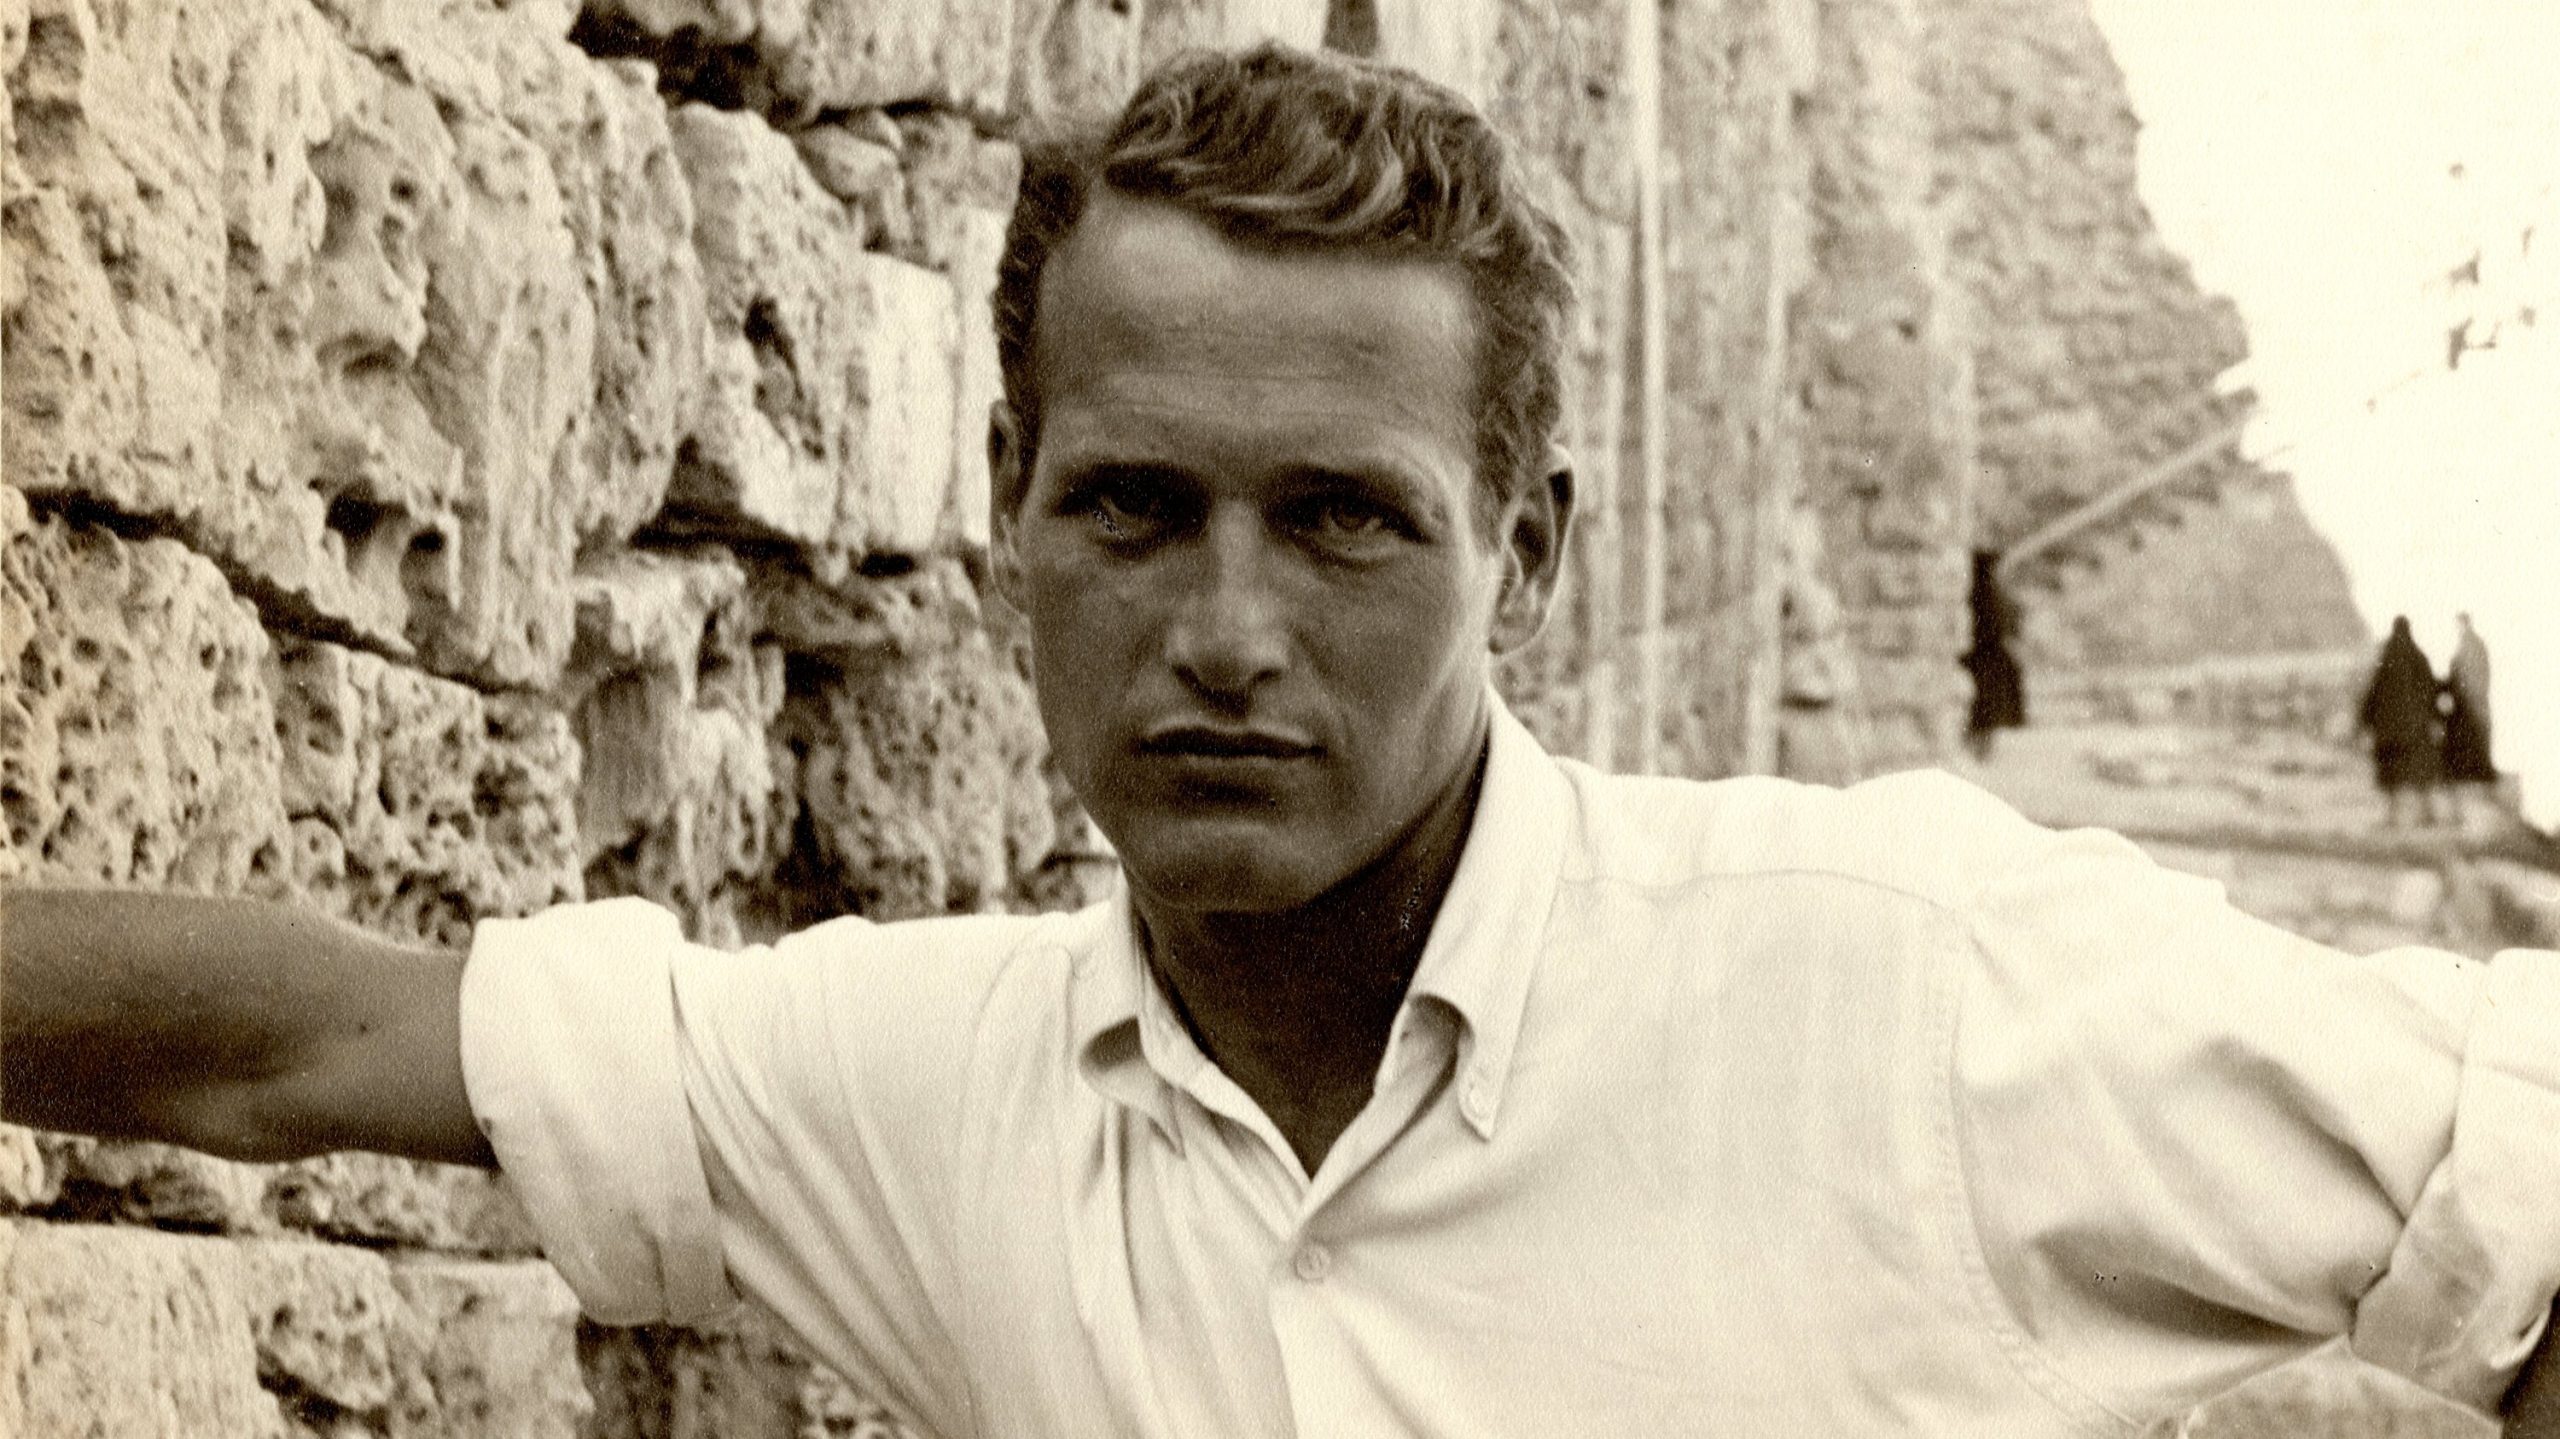 Brad Pitt called Paul Newman one of the most handsome men alive in the past